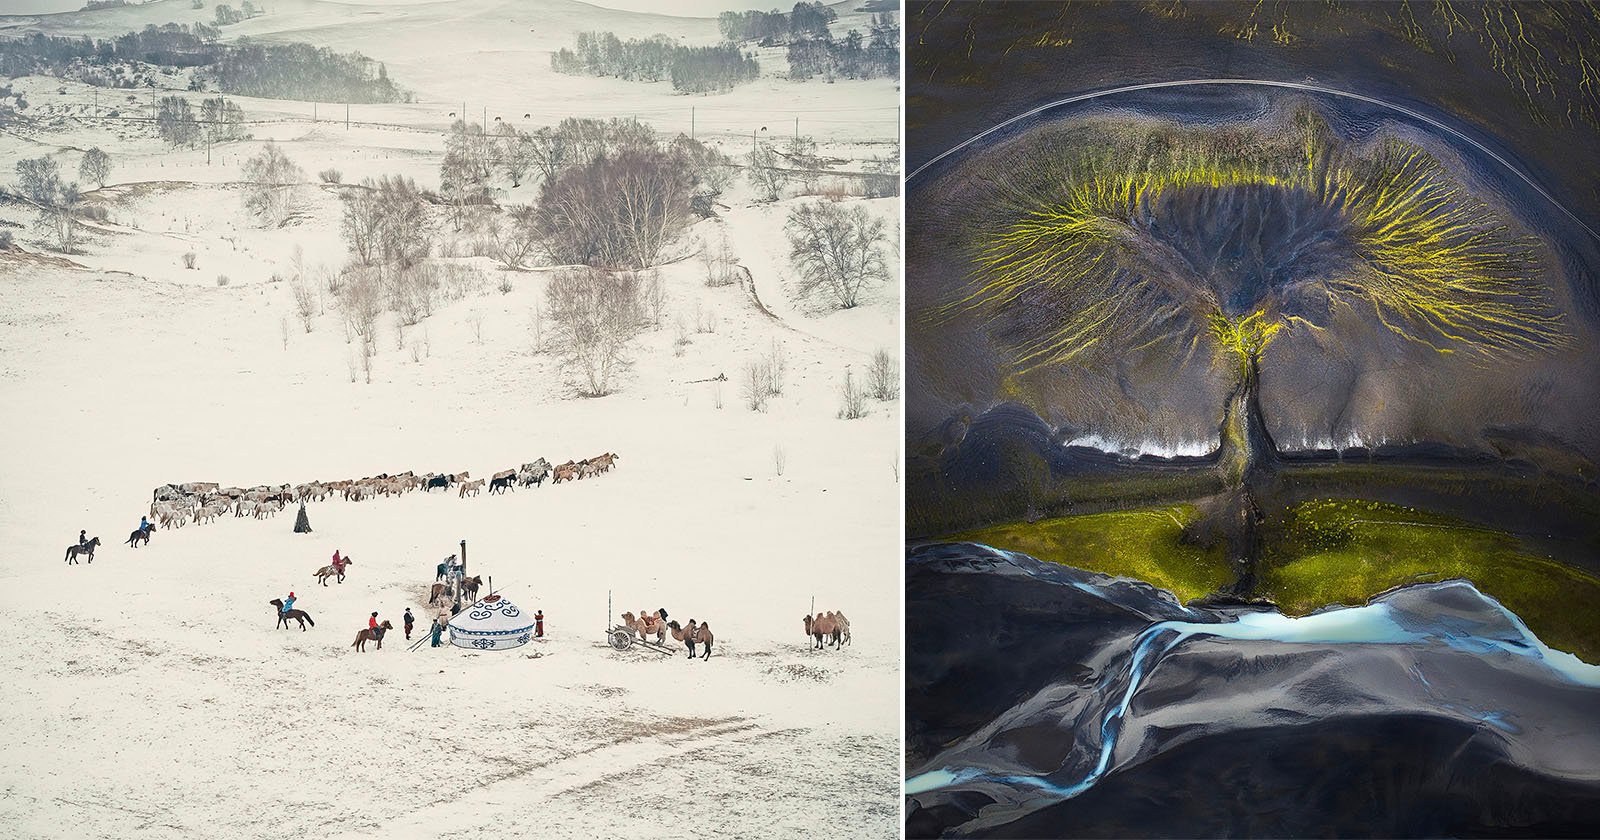 Painterly Winter Scene Named Best Drone Photo in SkyPixel Contest